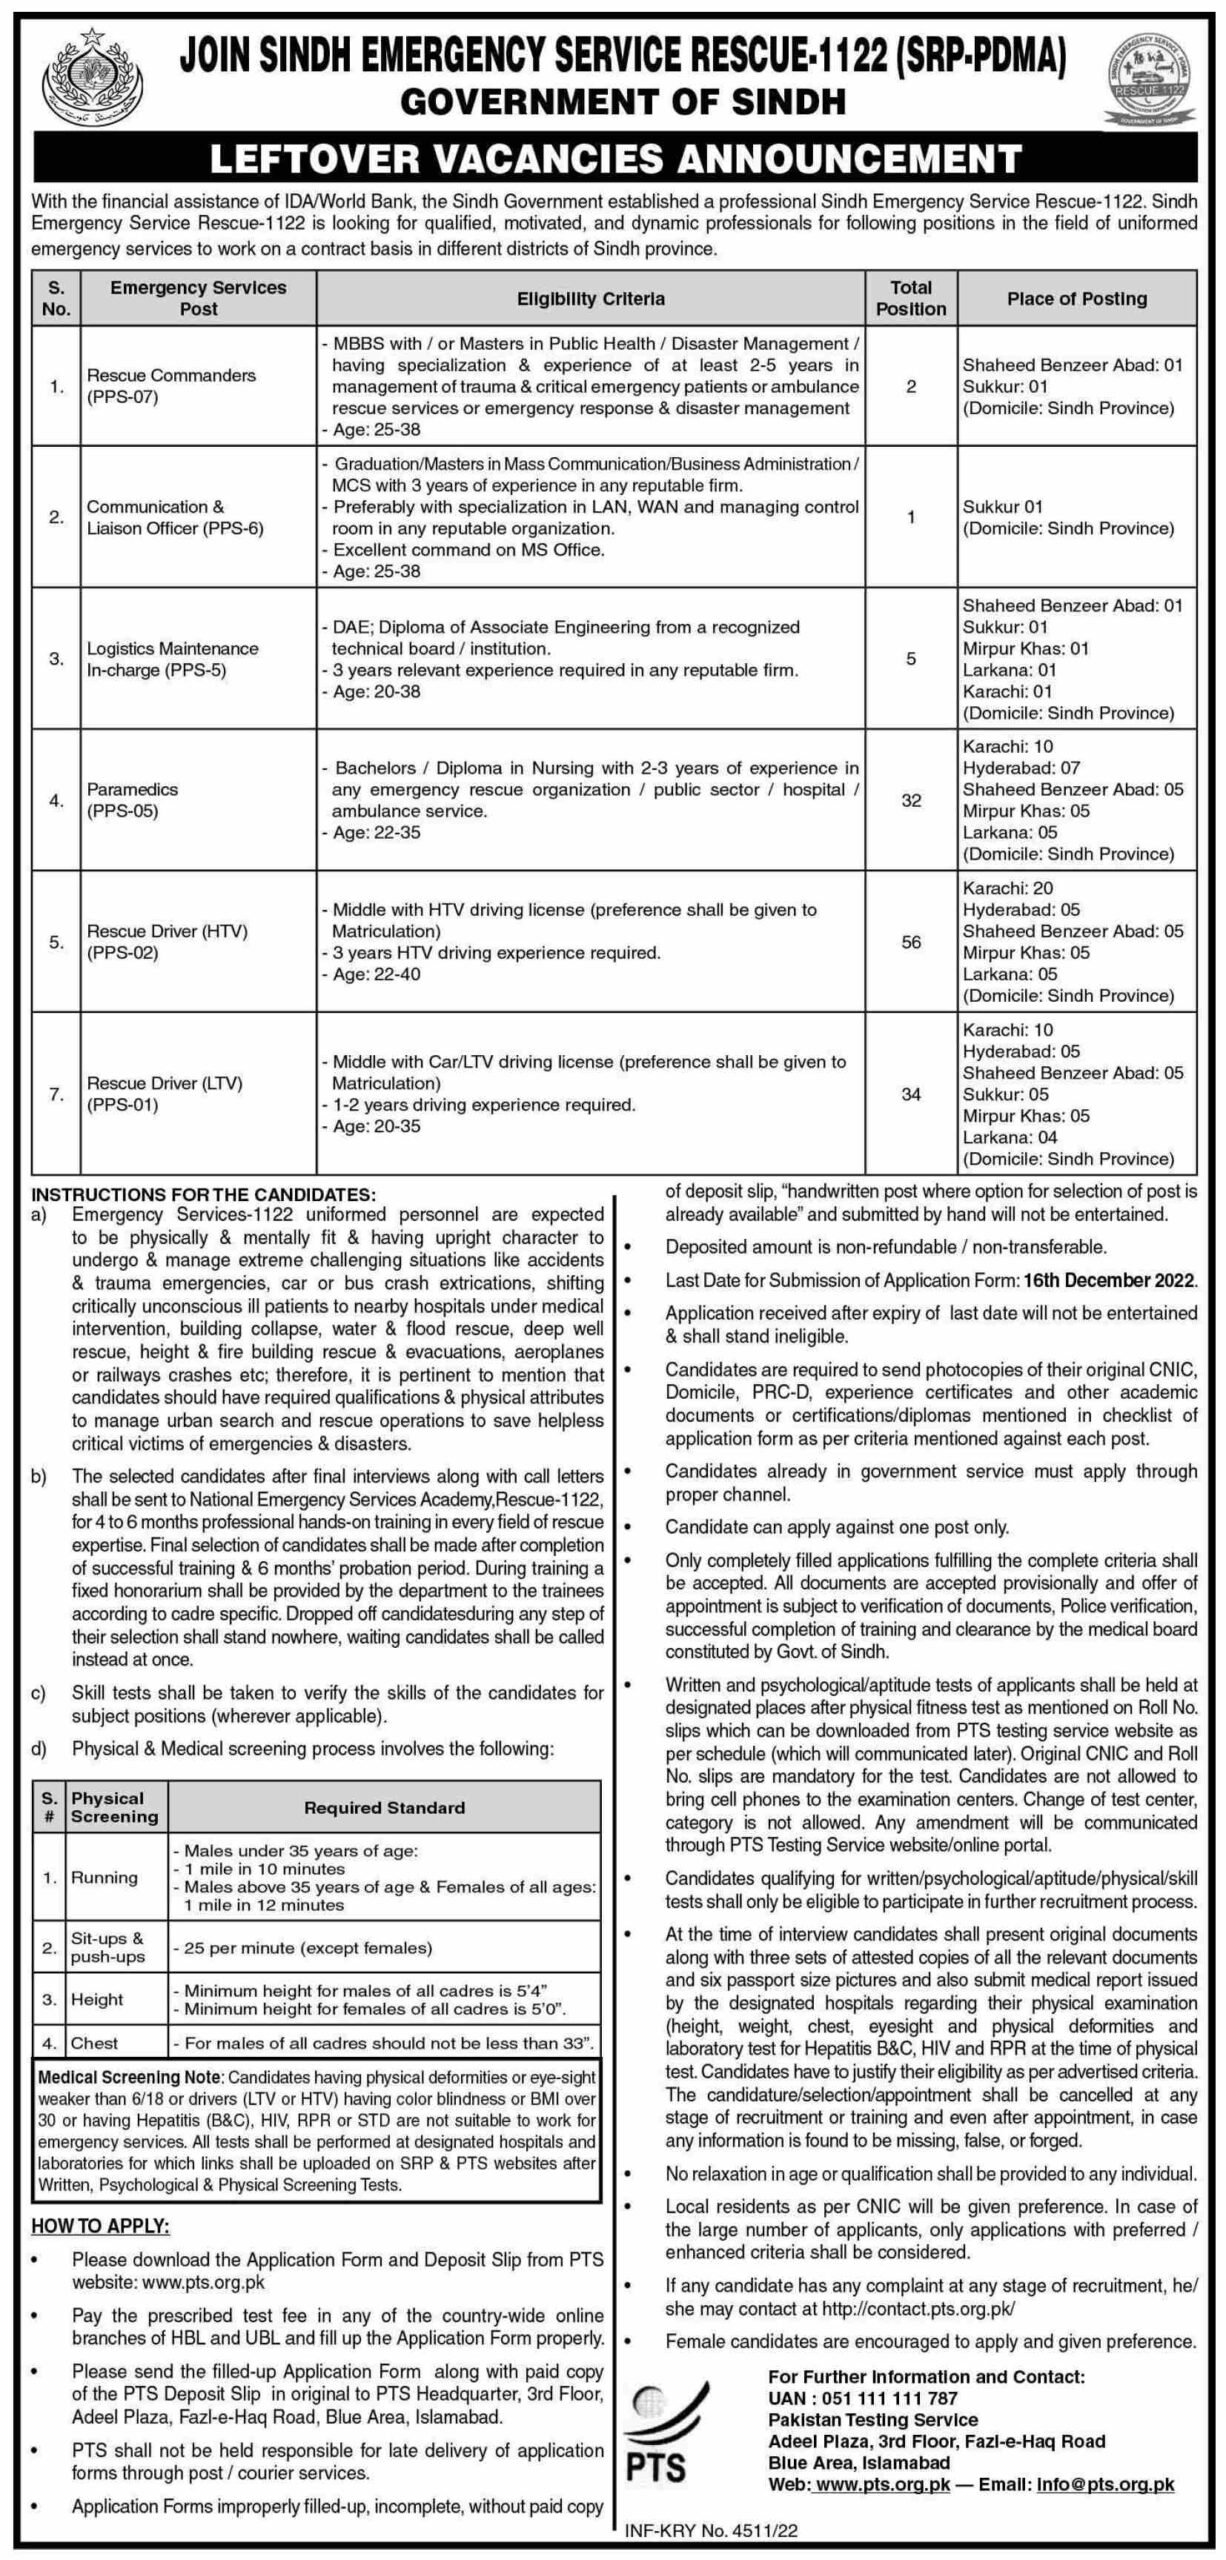 Sindh Emergency Service Rescue 1122 Jobs 2022 via PTS Apply